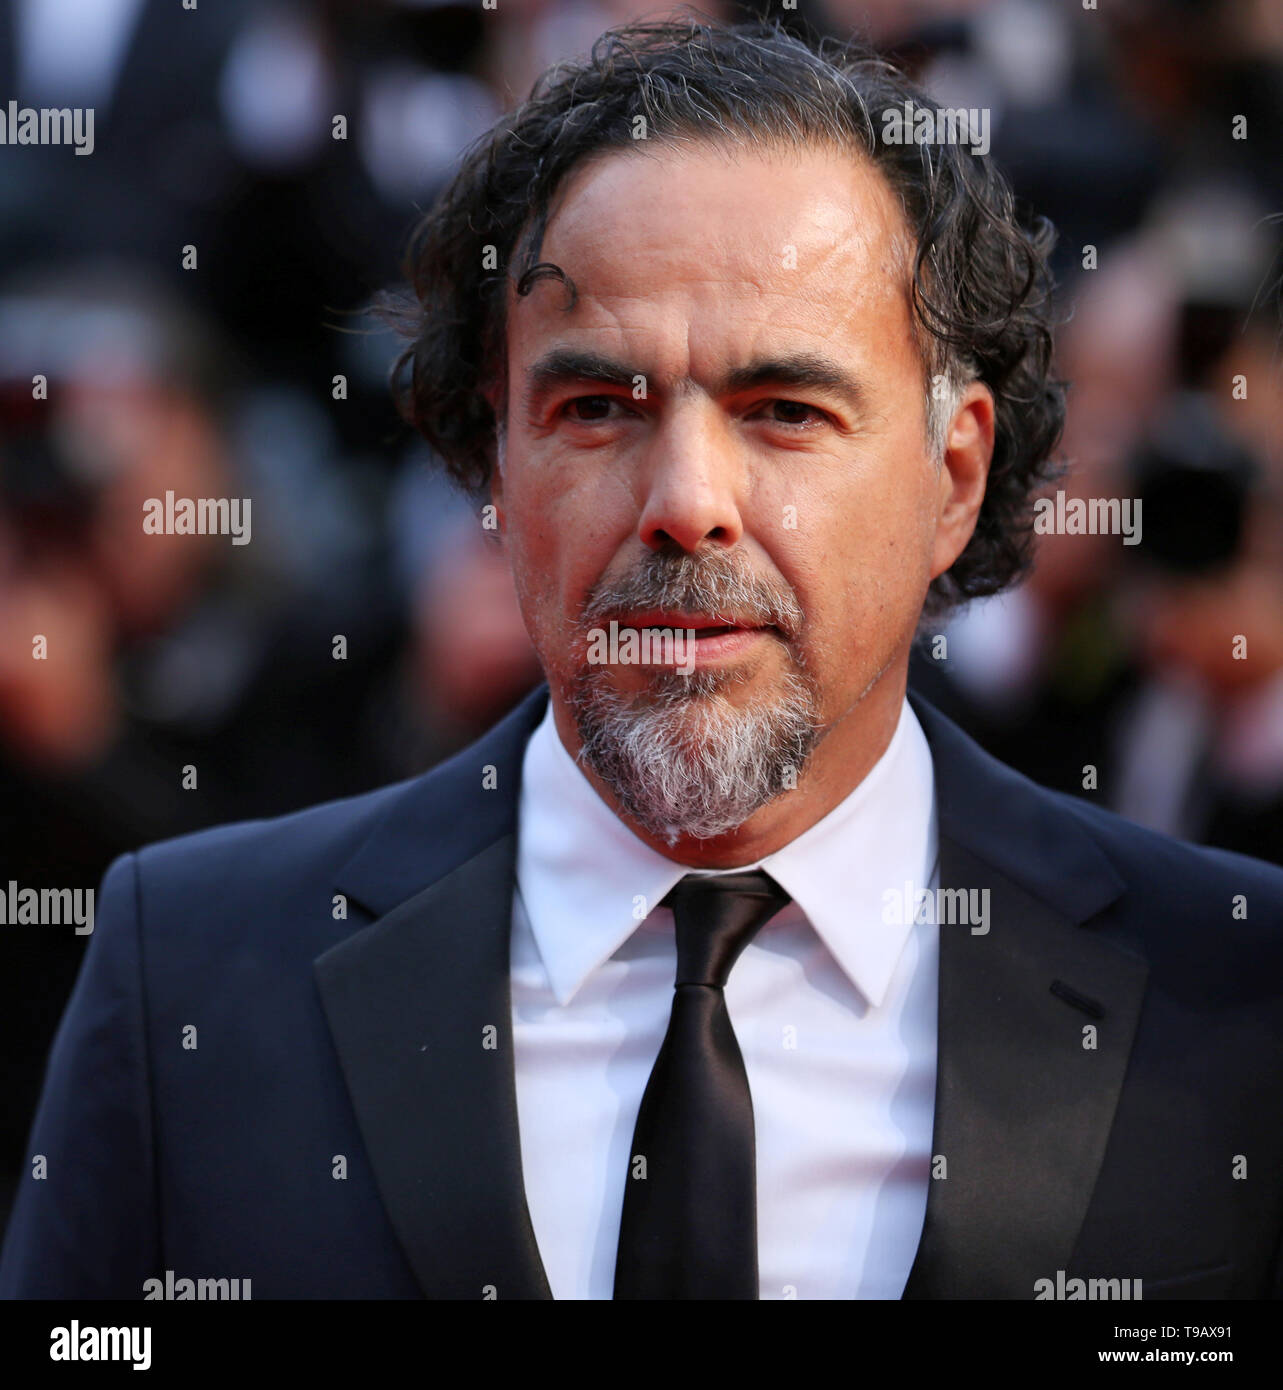 CANNES, FRANCE - MAY 17: President of the Main competition jury Alejandro Gonzalez Inarritu attends the screening of 'Pain And Glory (Dolor Y Gloria/ Douleur Et Gloire)' during the 72nd Cannes Film Festival (Credit: Mickael Chavet/Project Daybreak/Alamy Live News) Stock Photo